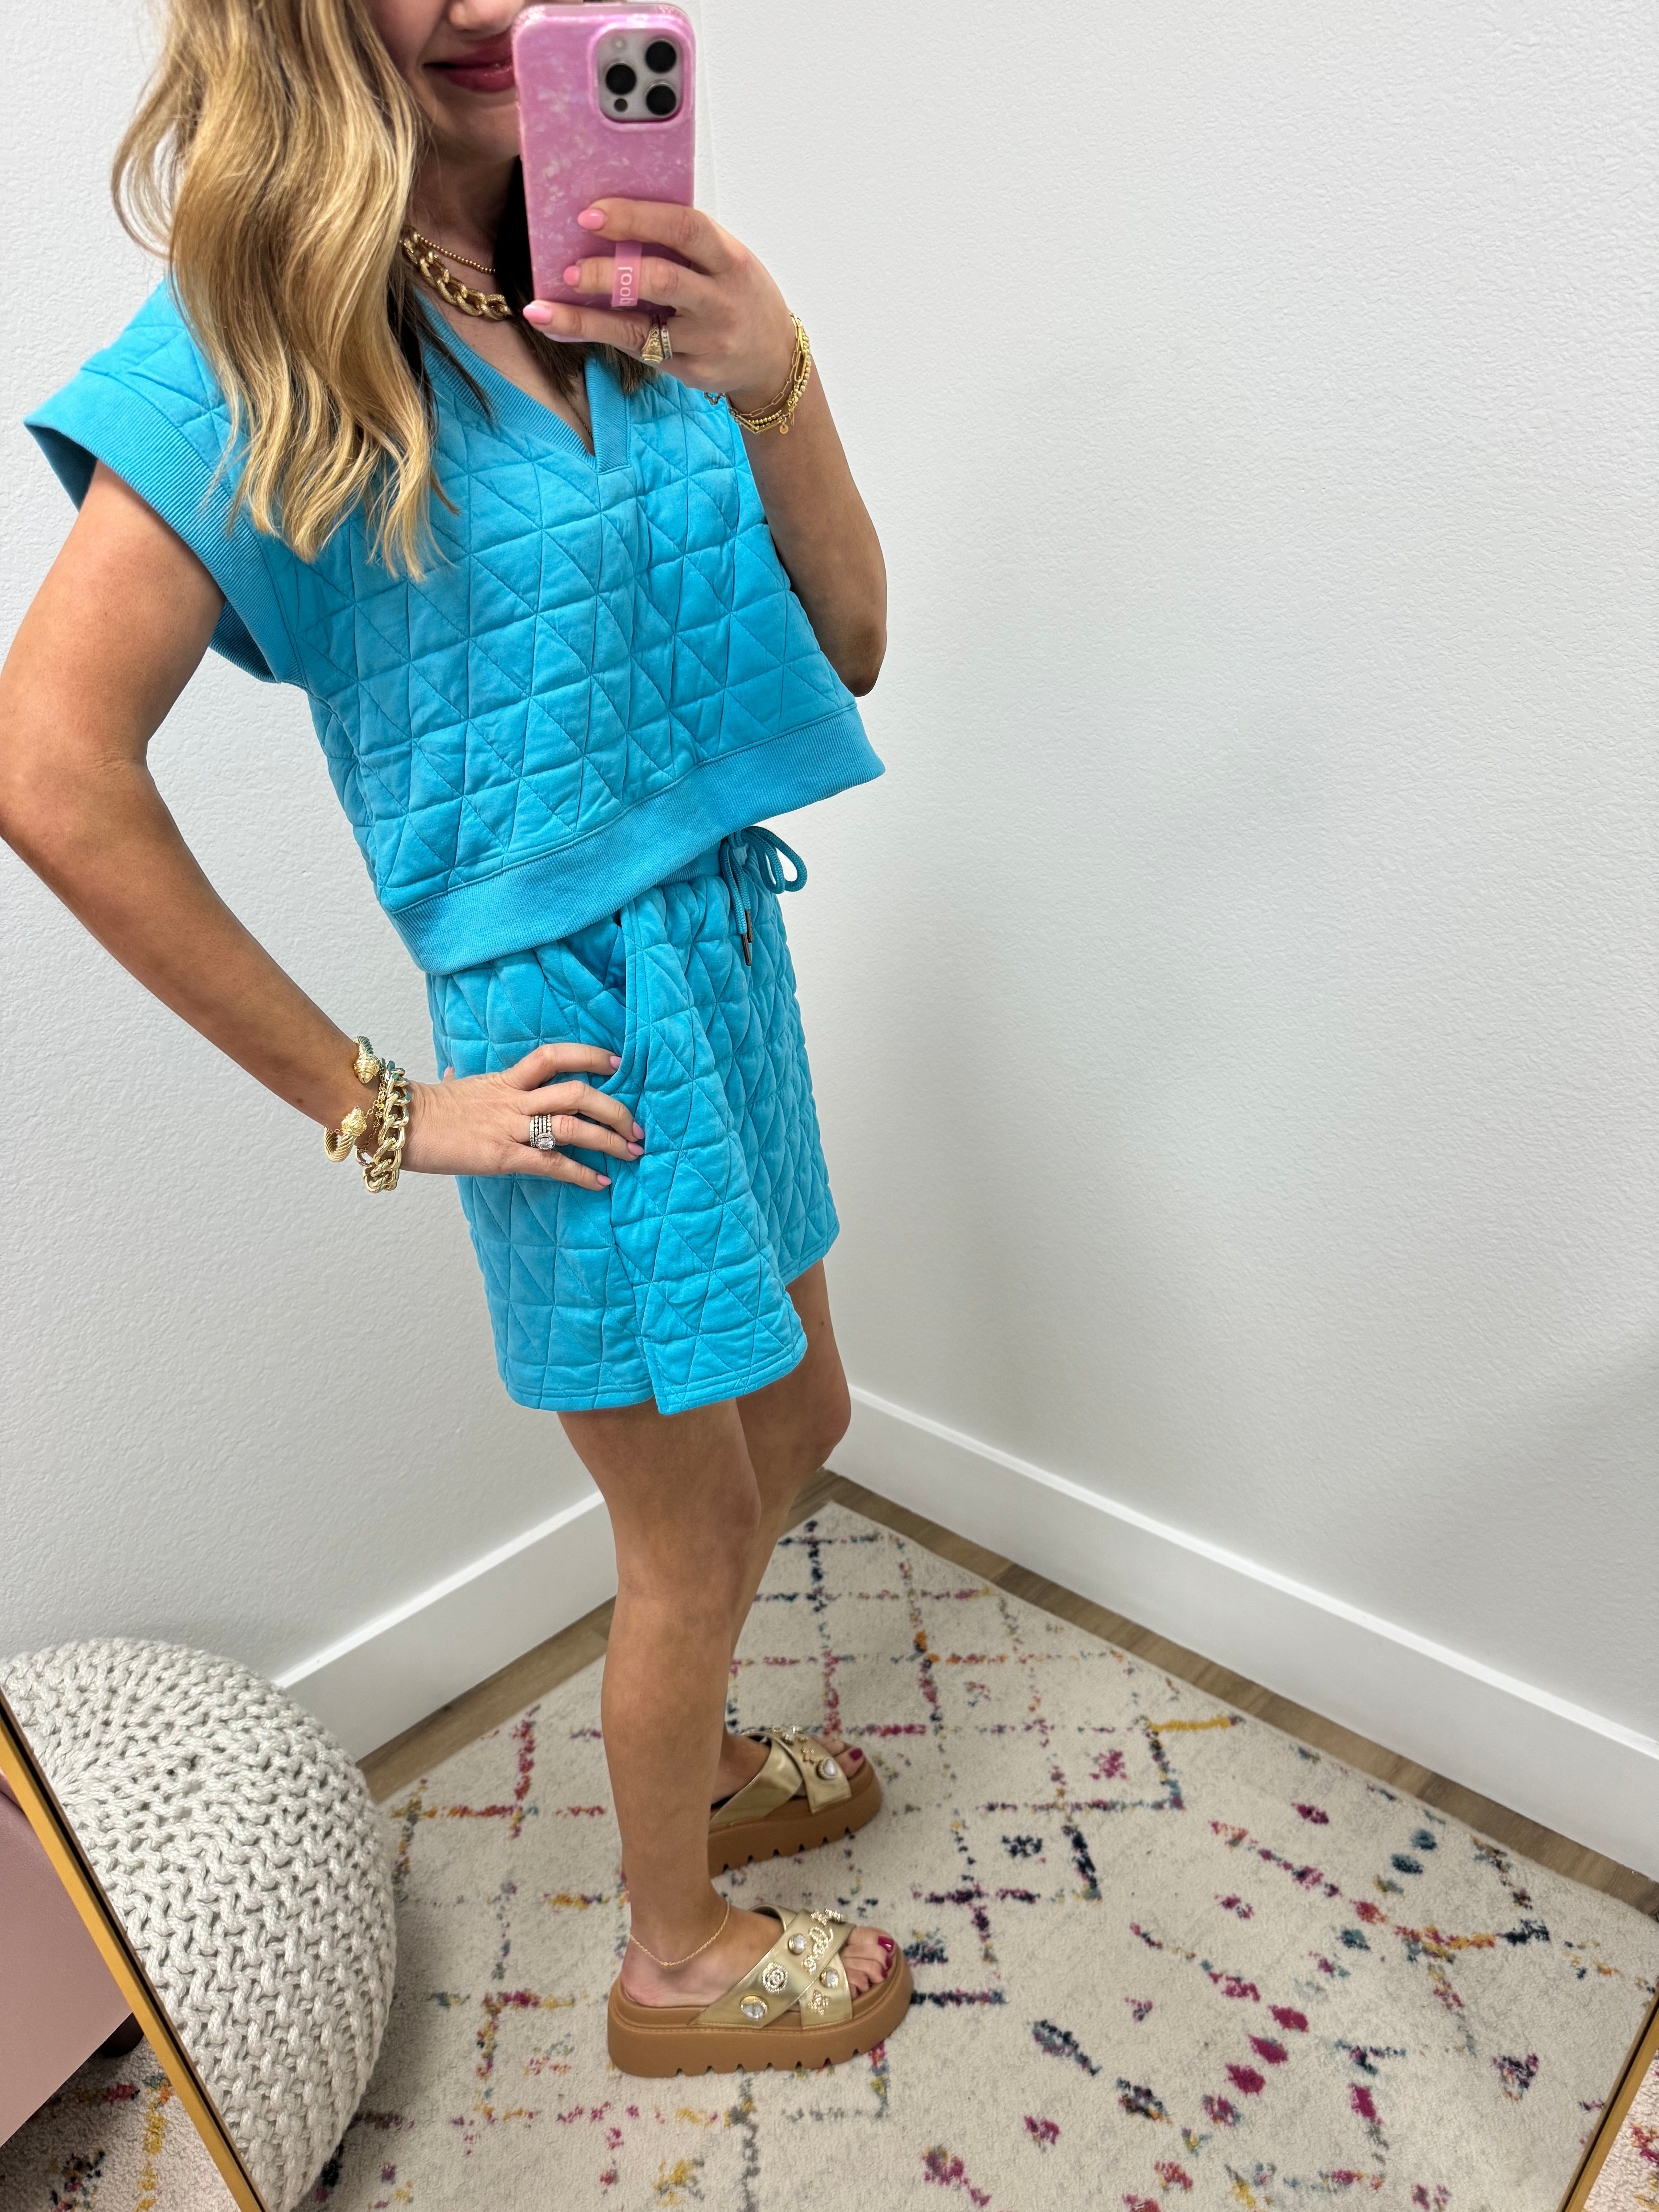 Aqua Quilted Two Piece Skirt Set